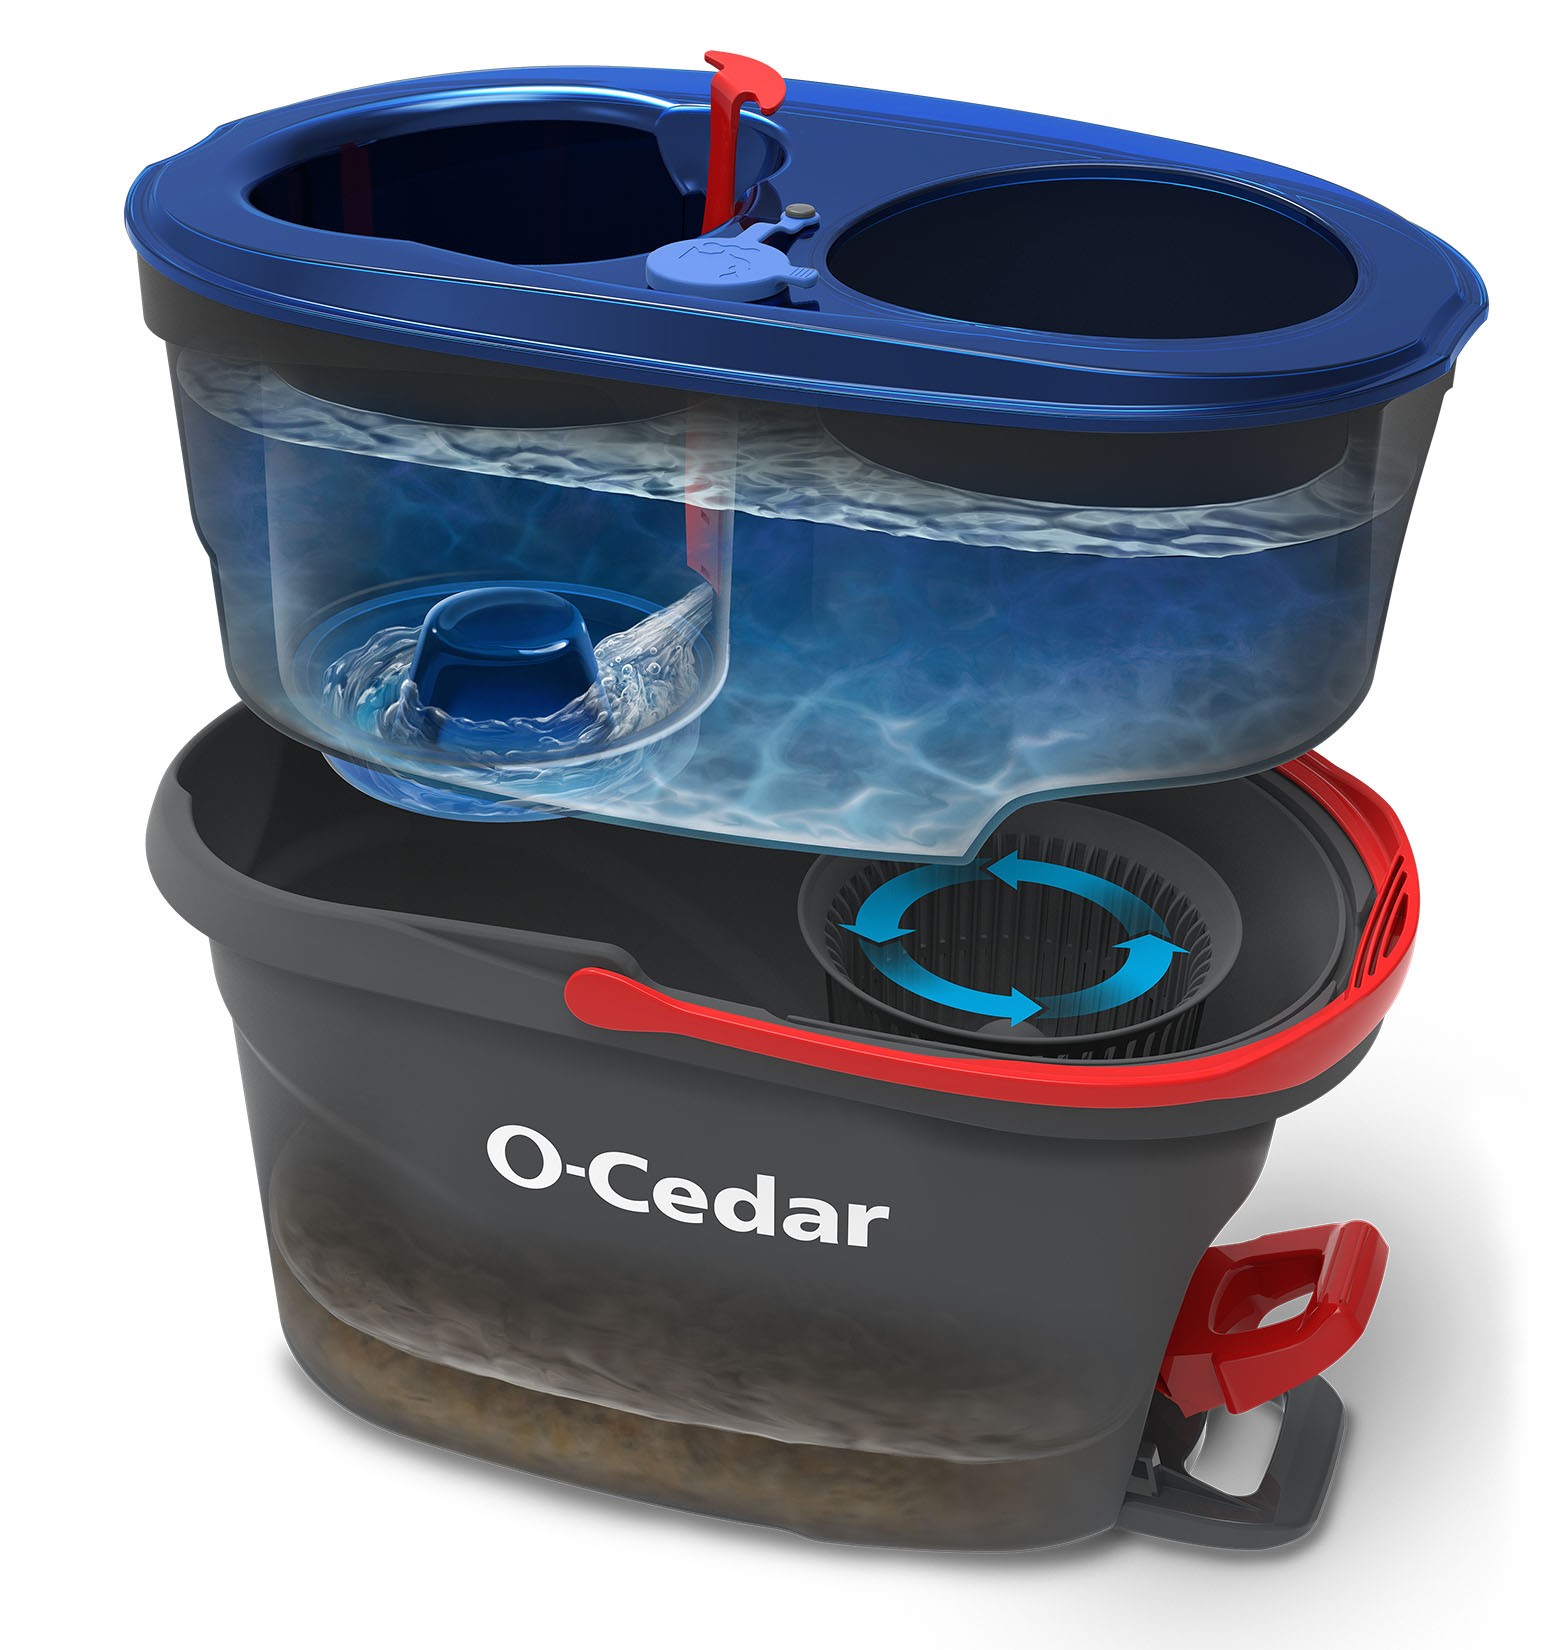 O-Cedar EasyWring RinseClean Spin Mop and Bucket System, Hands-Free System - image 10 of 25